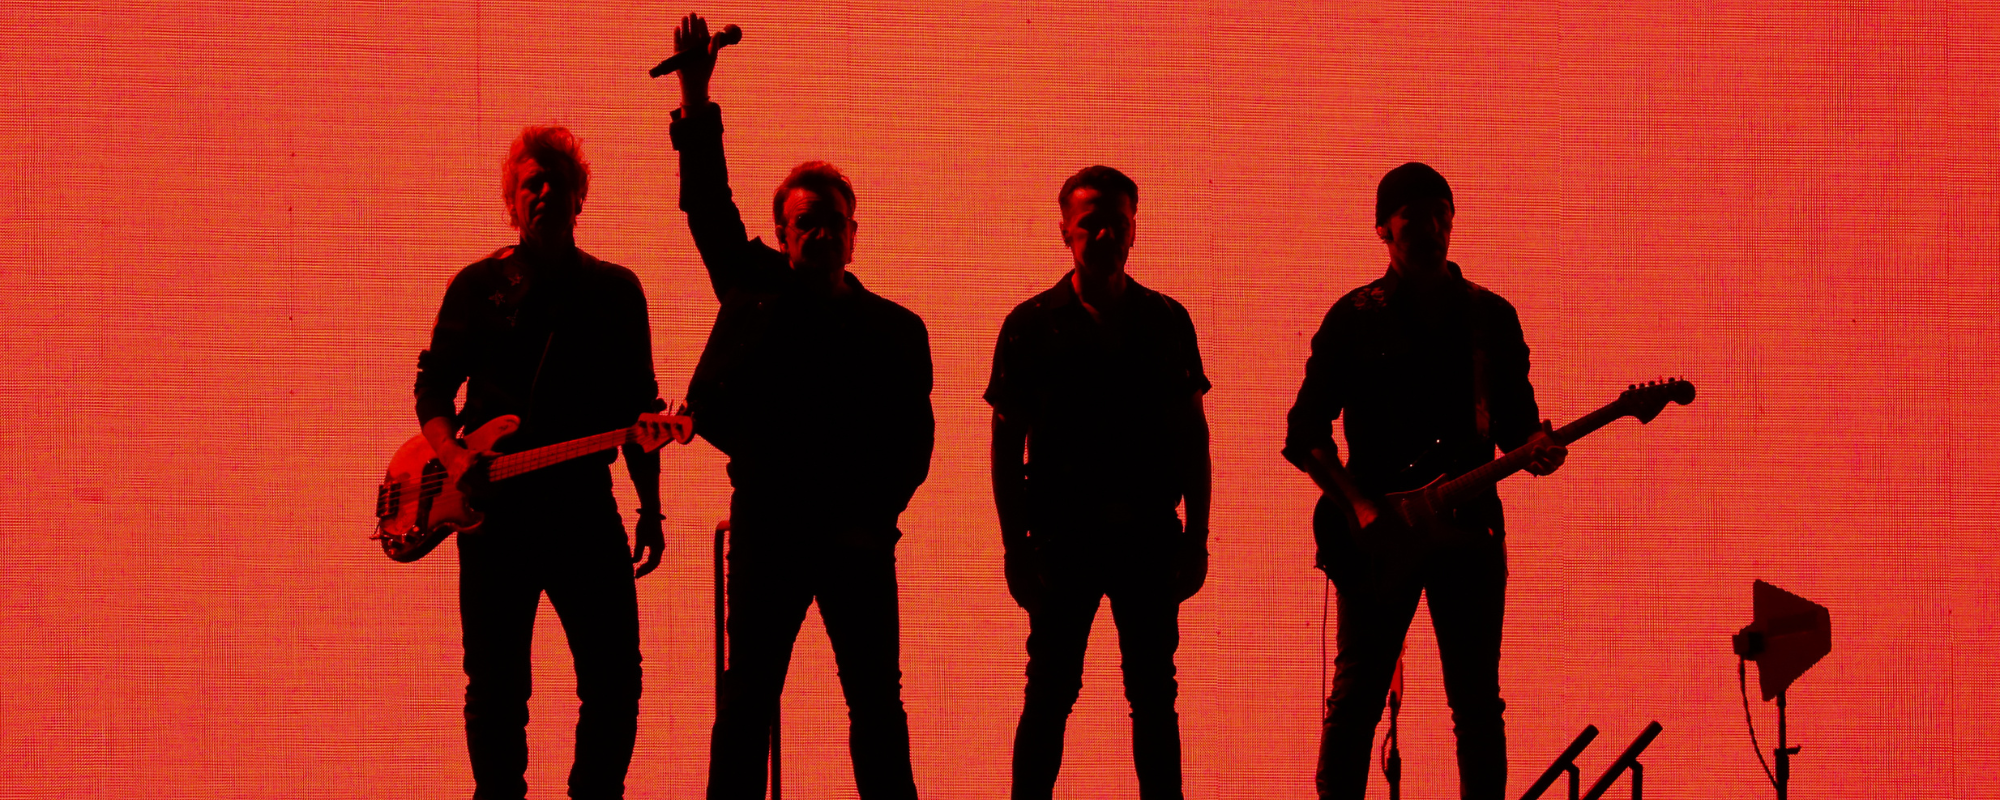 The 4 Times U2 Reinvented Themselves